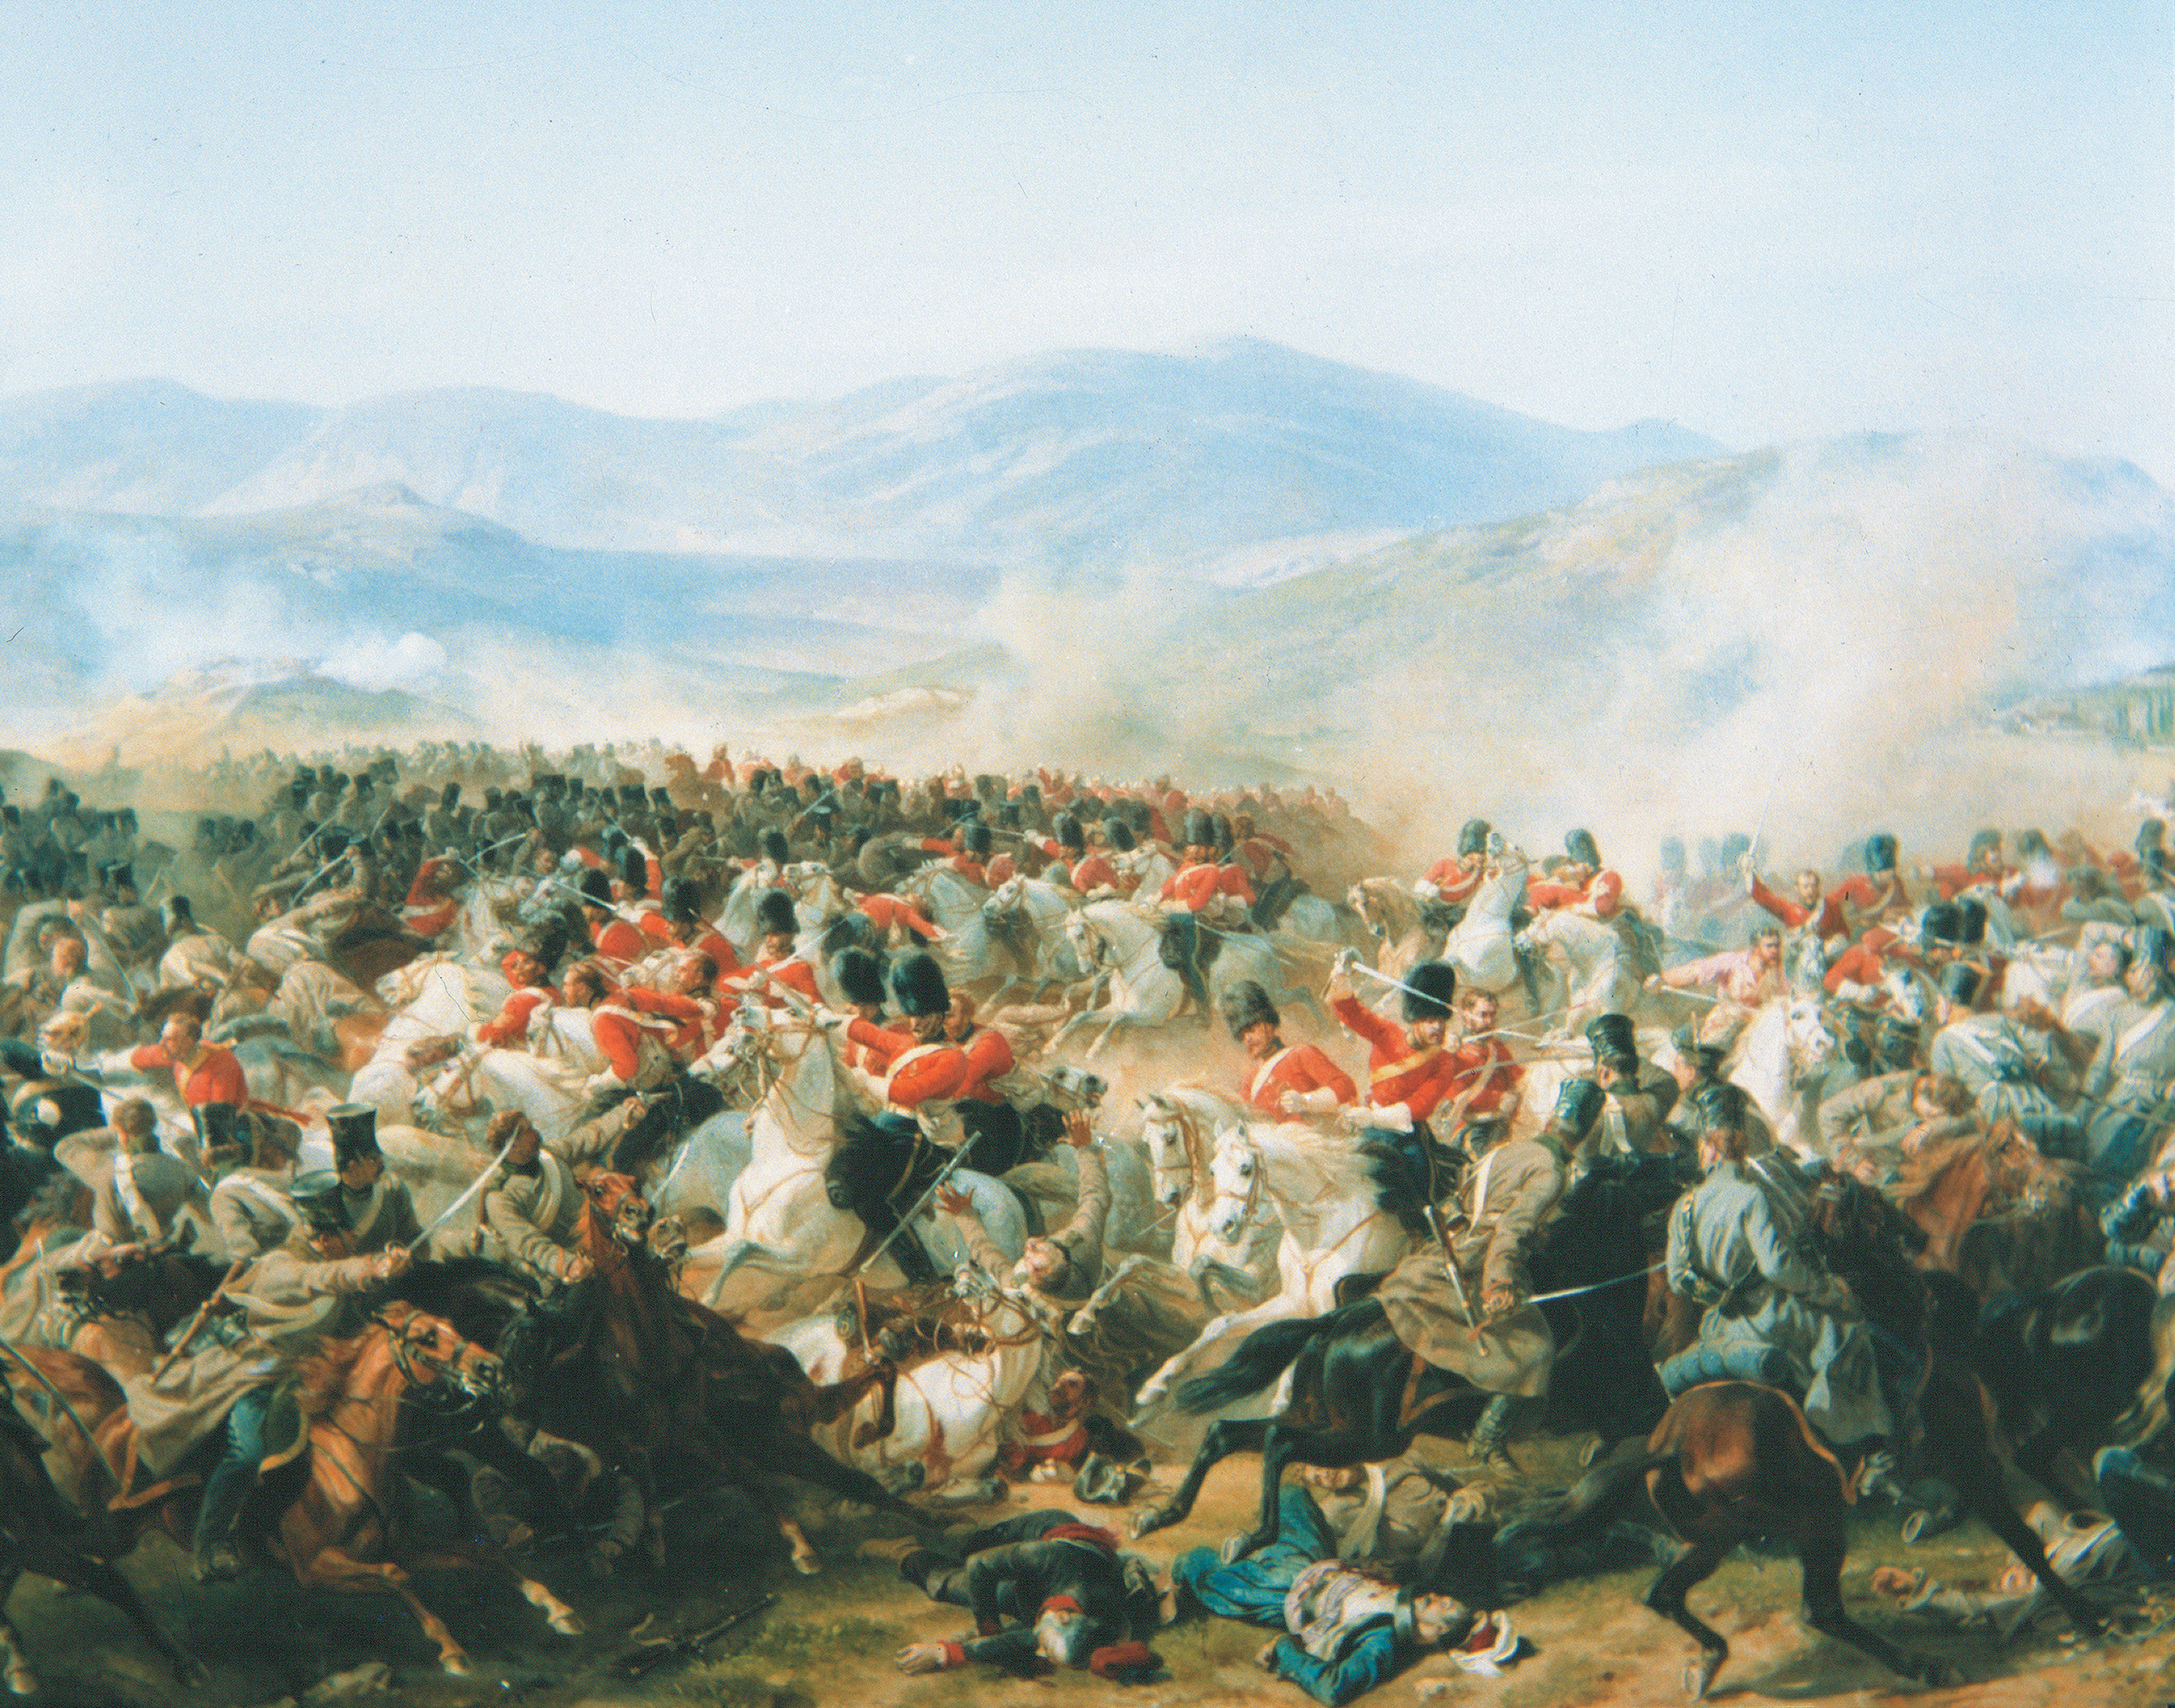 Riders of the British Heavy Squadron smash into the superior numbers of Russian cavalry bearing down on British defenses of Kadikoi and Balaklava. Their commander, General James Scarlett, led the charge, at one time out front by 50 yards.  